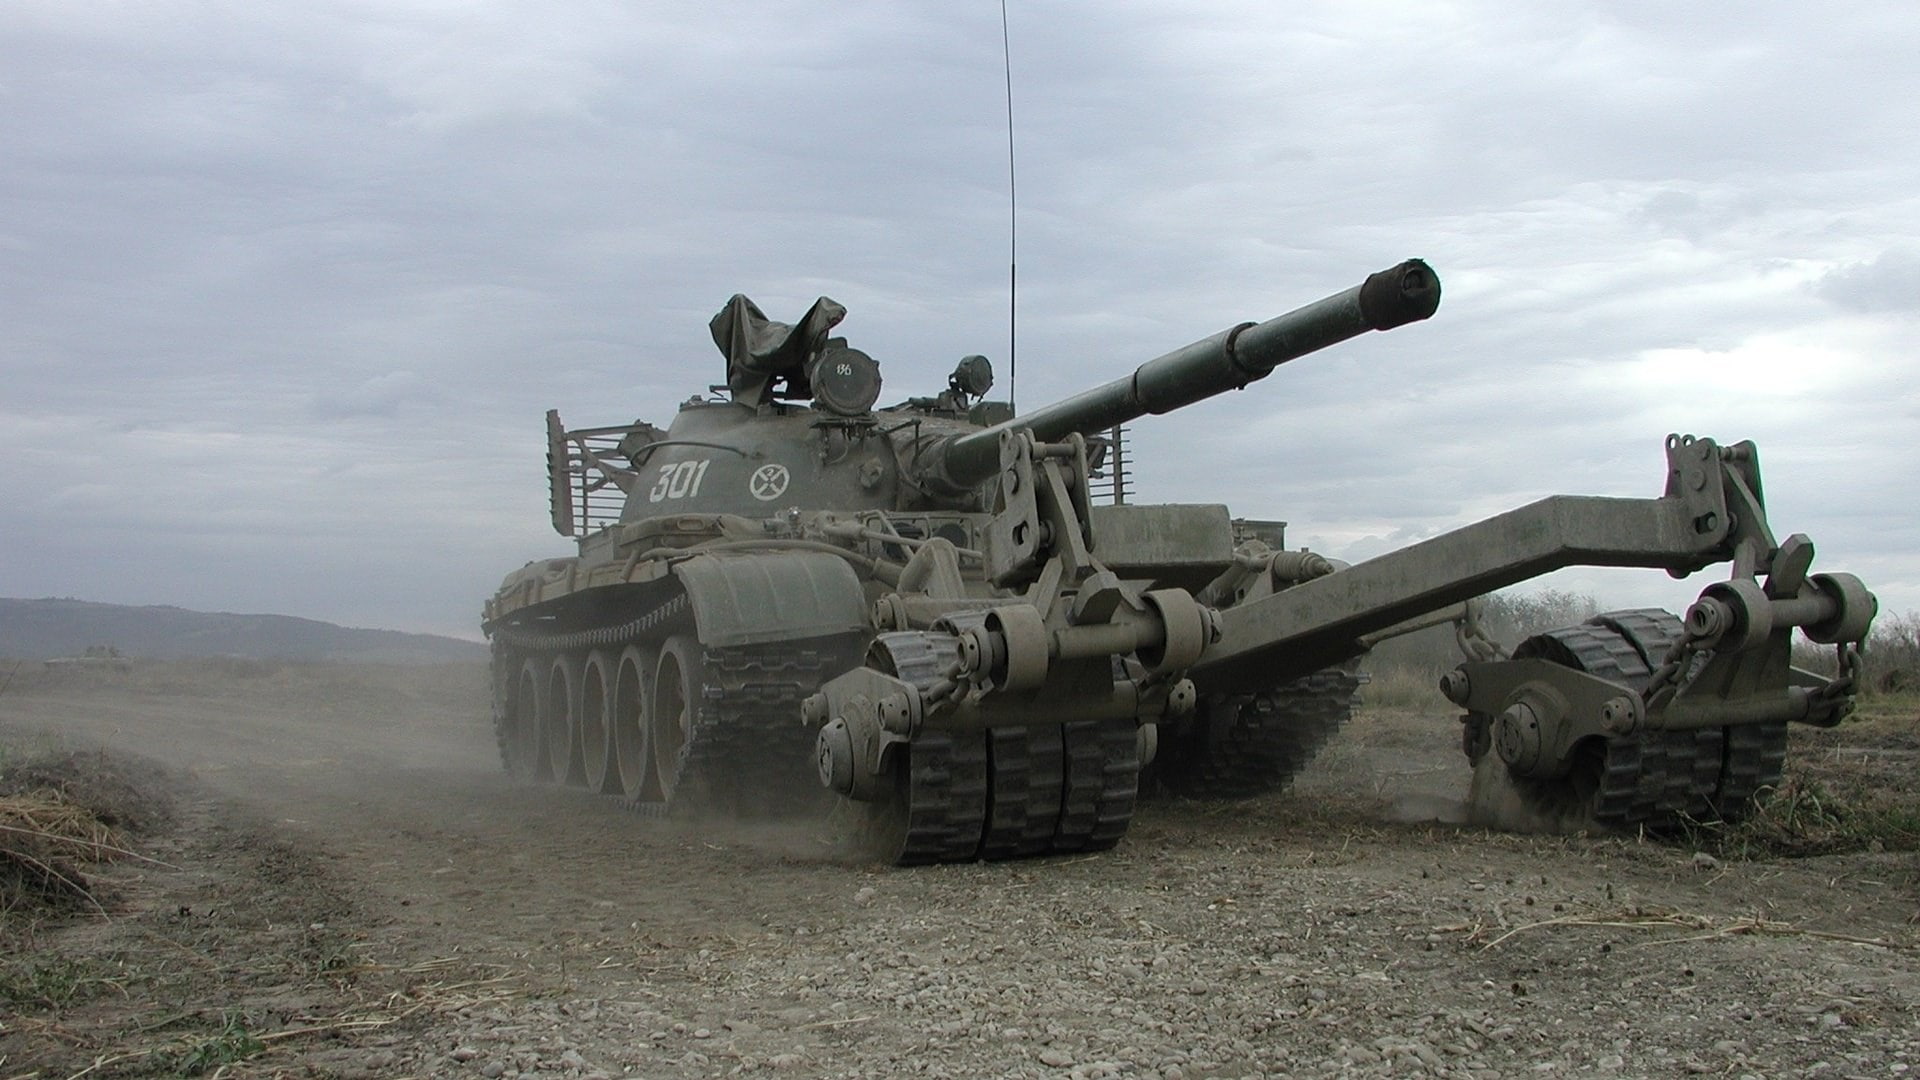 t 62, weapon, military, sky, fighting, day, conflict, armored tank